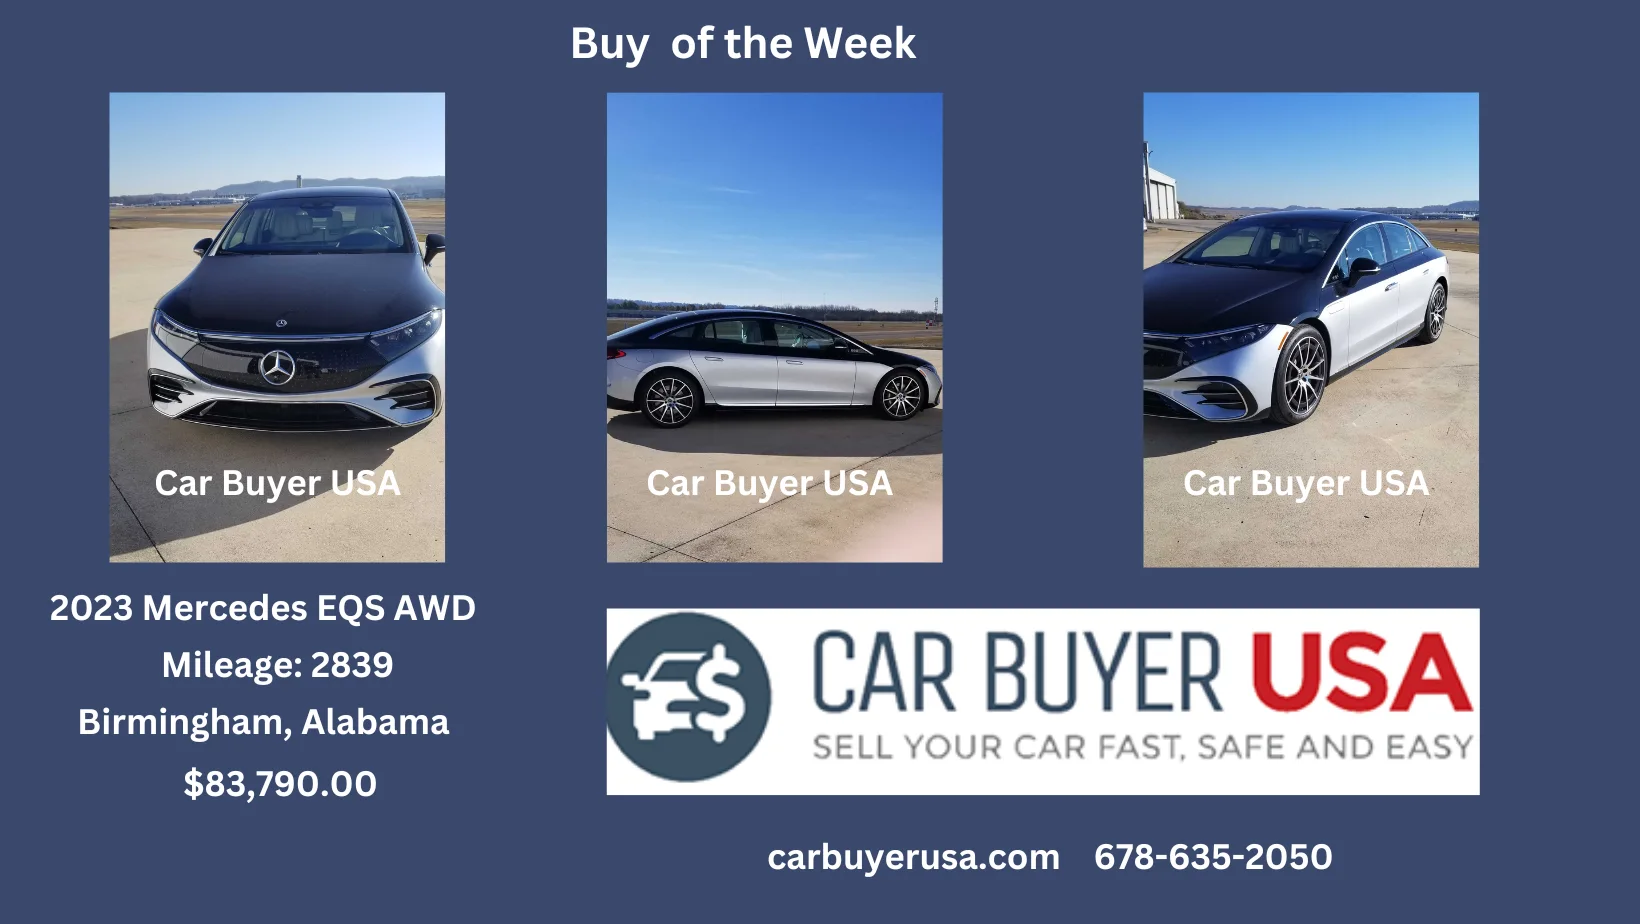 CarBuyerUSA bought this 2023 Mercedes-Benz, EQS AWD in Birmingham, AL for $83,790.00